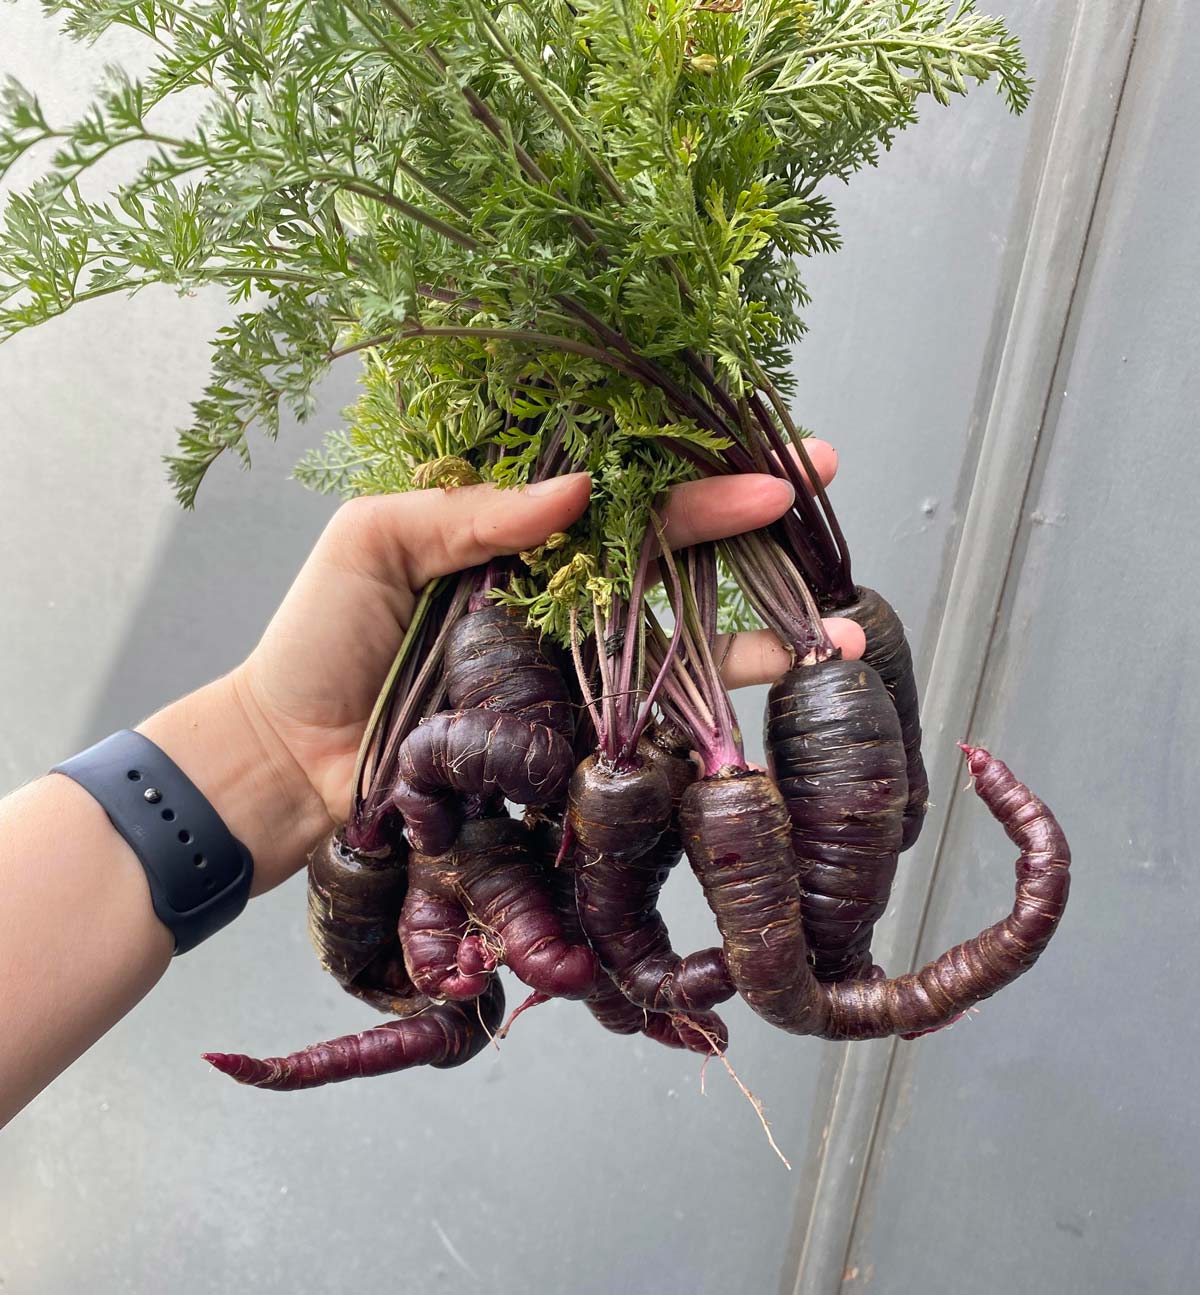 Look at these carrots I grew